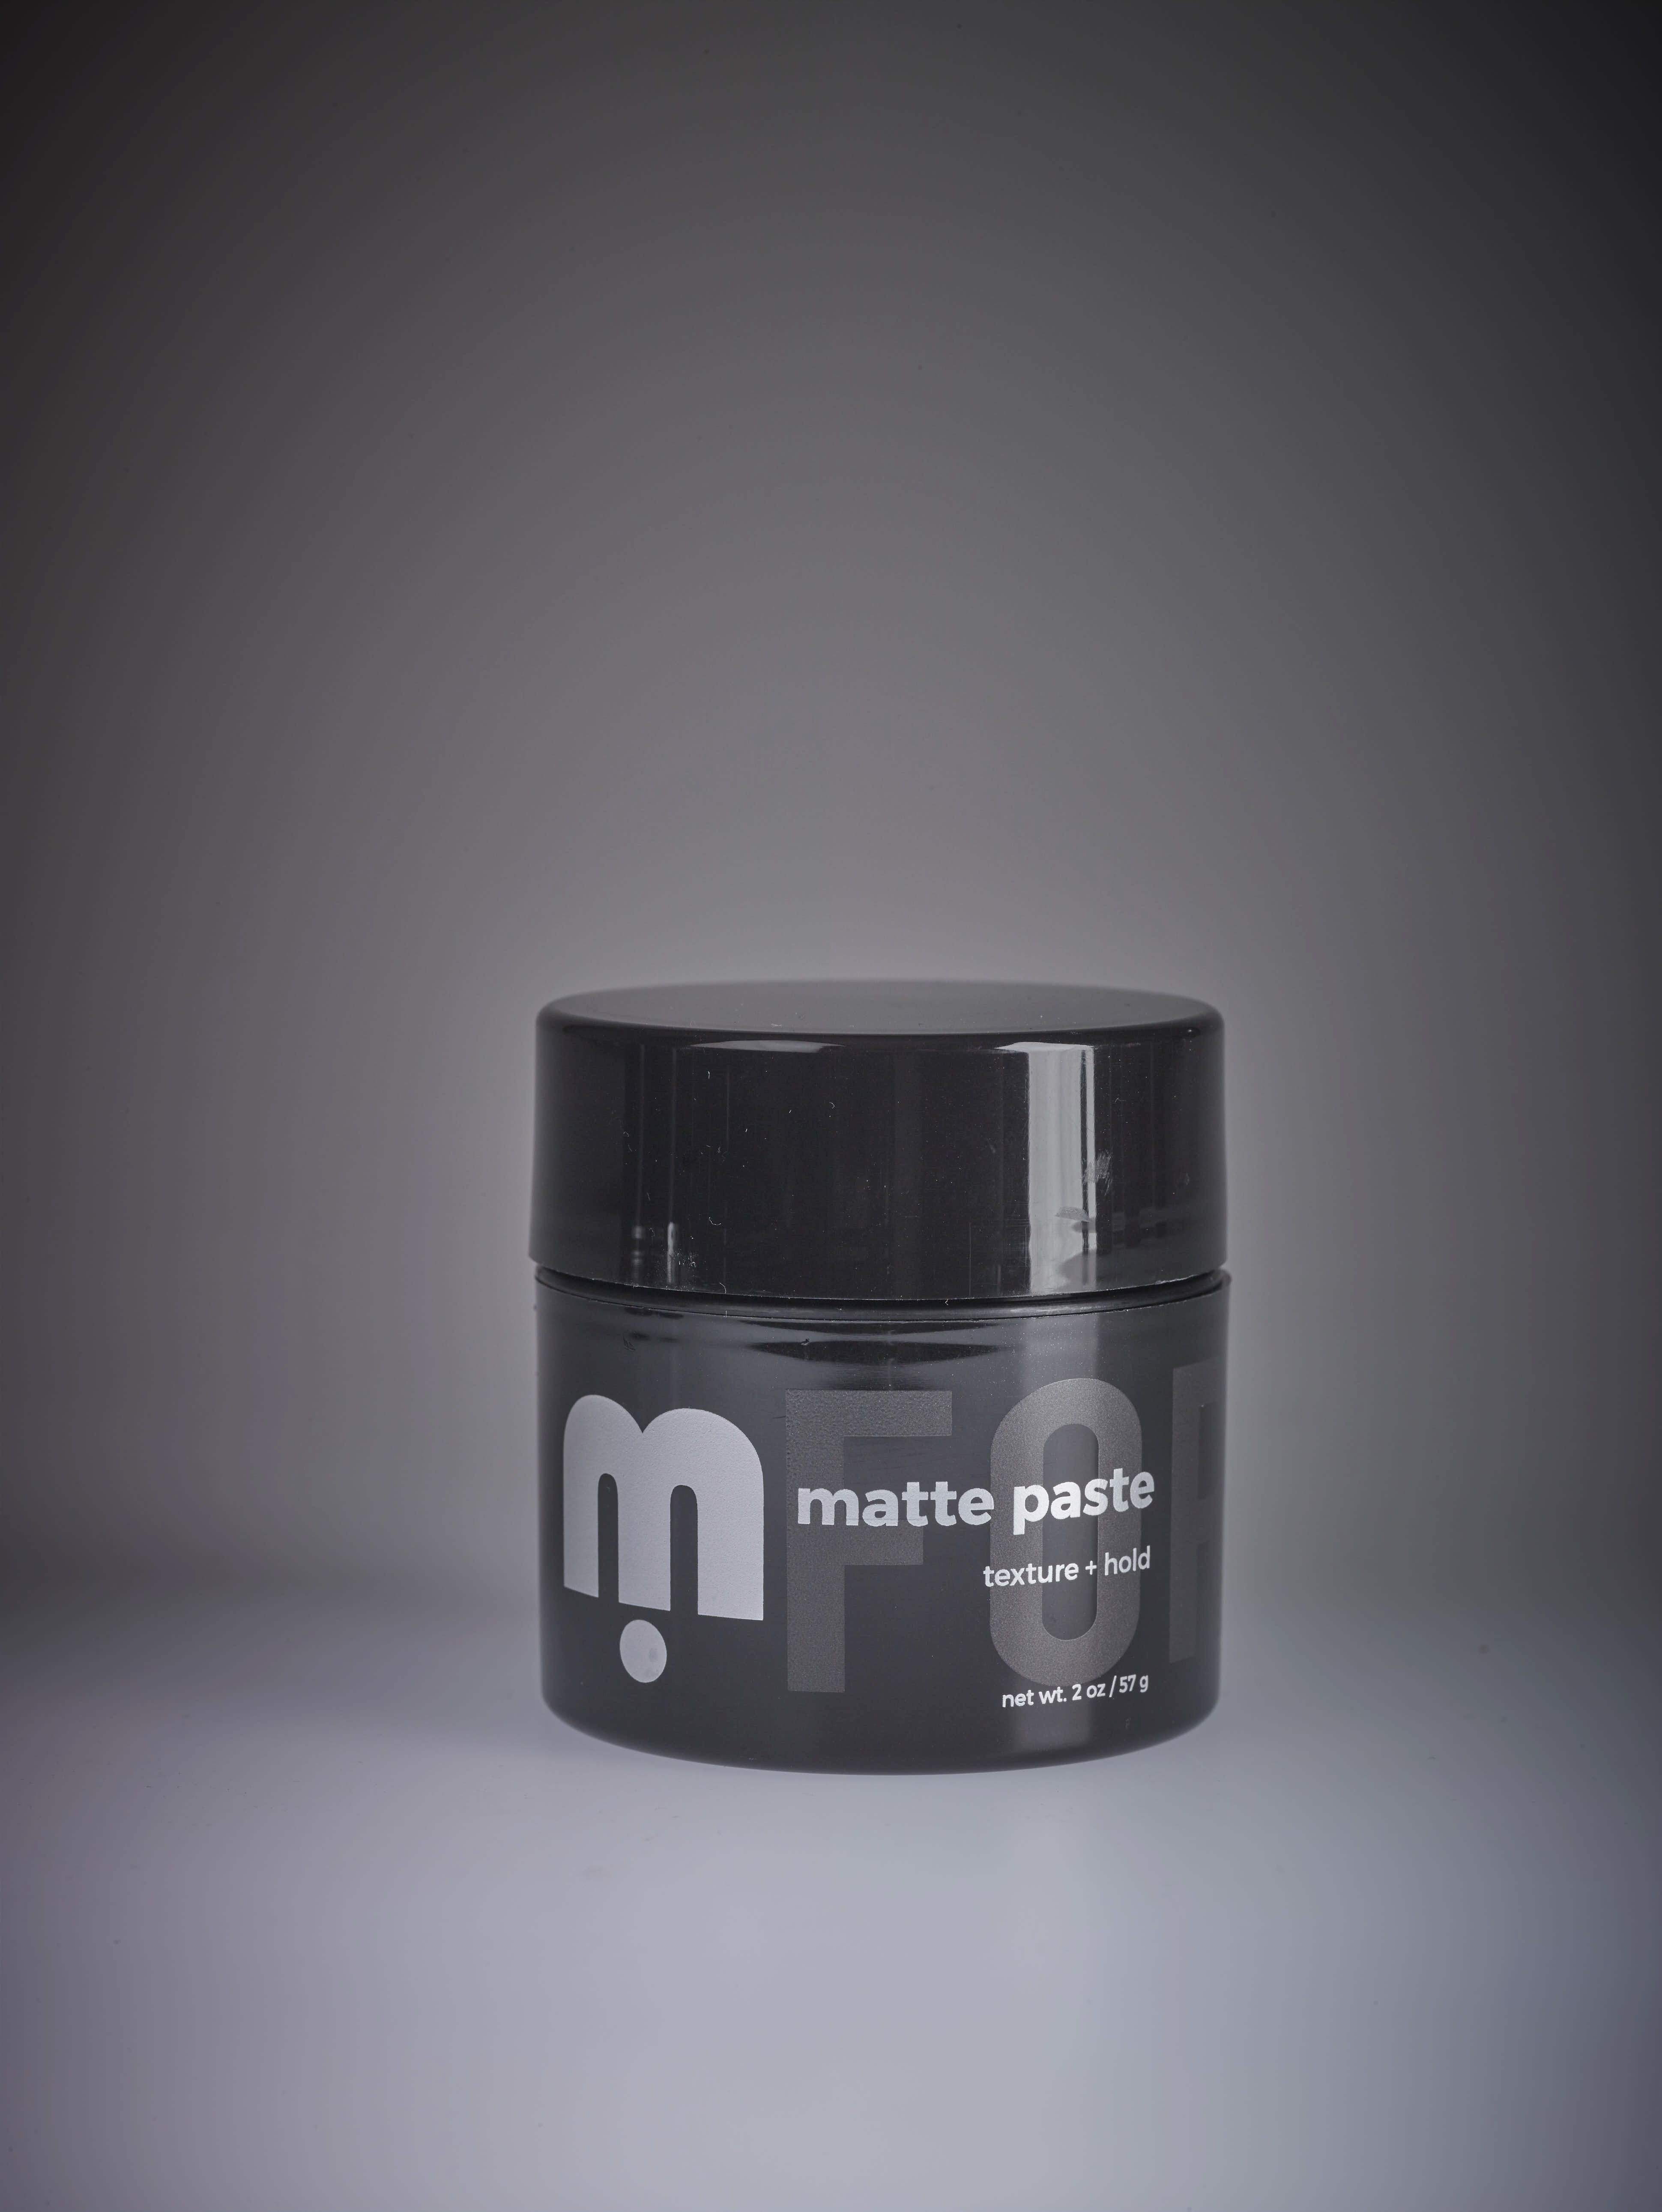 He's a 10 Miracle Matte Molding Paste for Hair